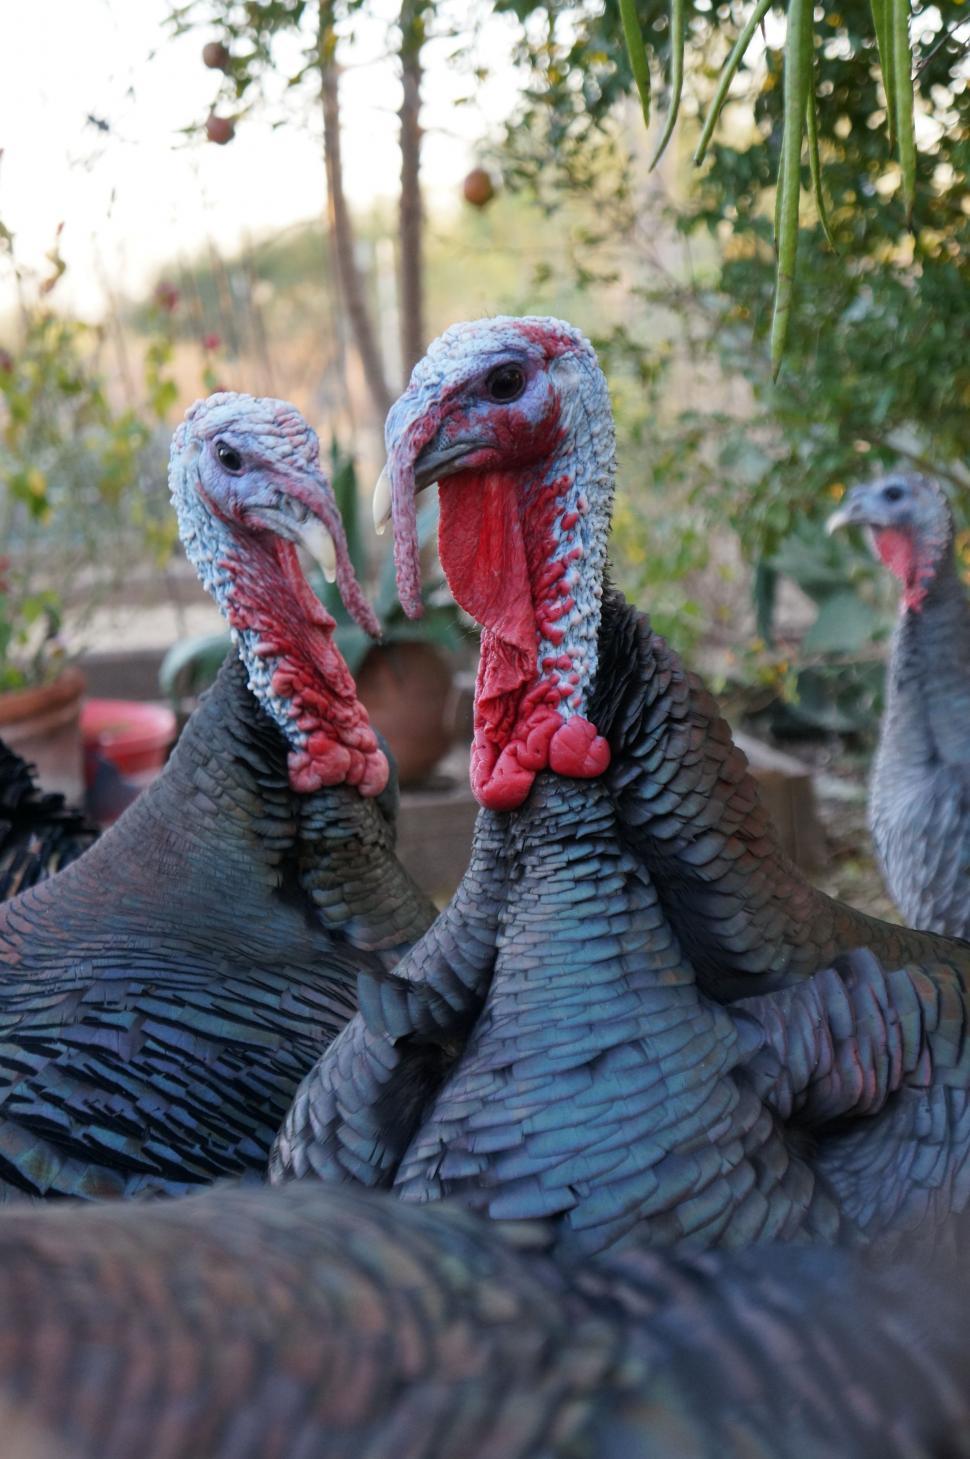 Free Image of Group of Turkeys Standing Together 